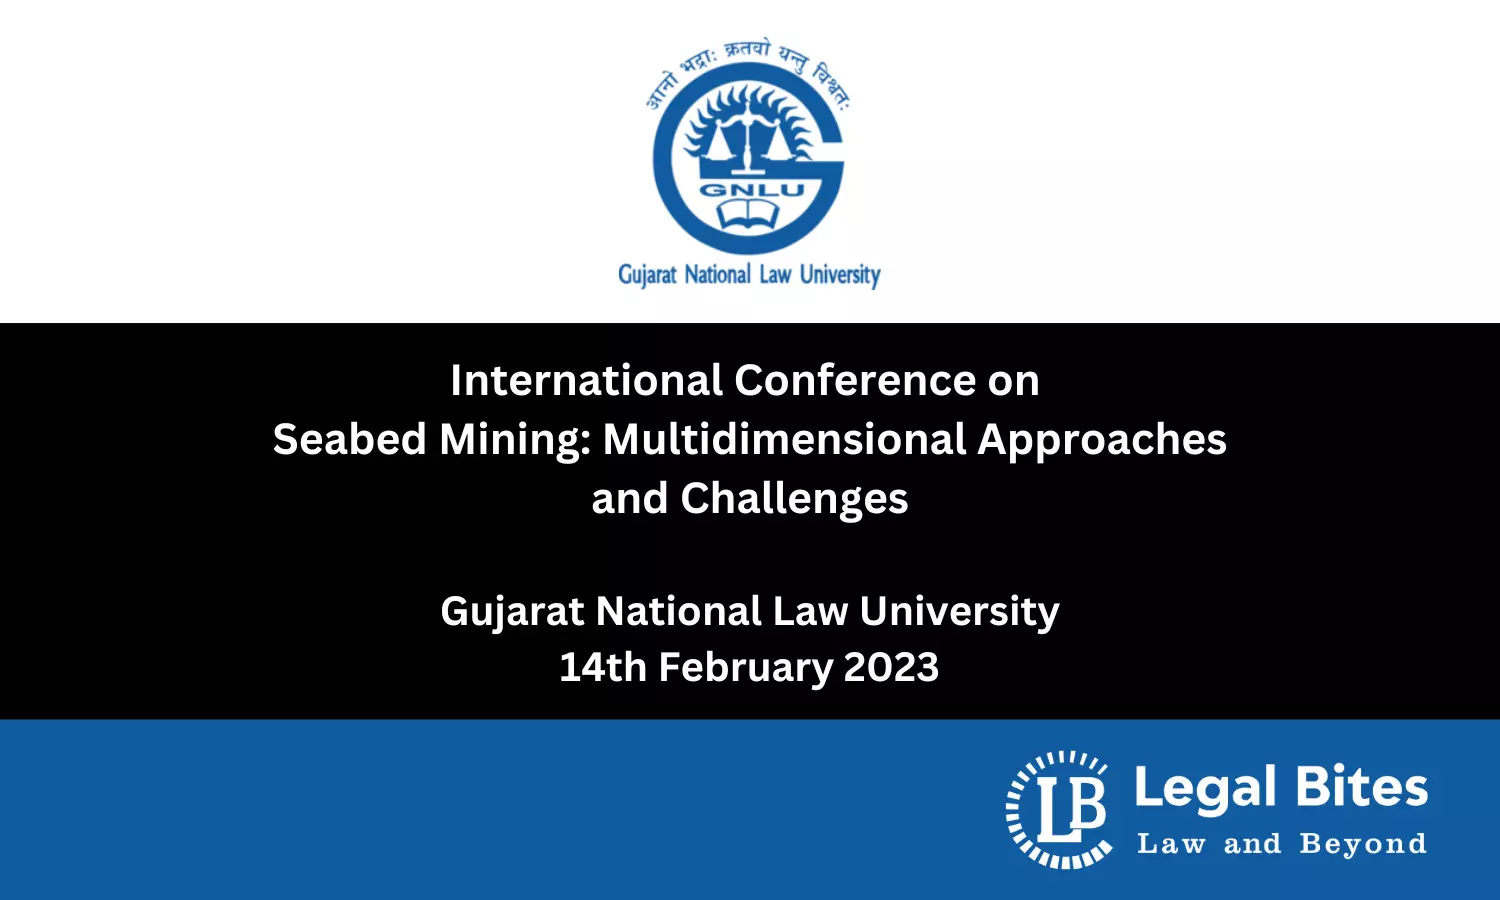 International Conference on Seabed Mining: Multidimensional Approaches and Challenges 2023  | Gujarat National Law University in collaboration with International Seabed Authority